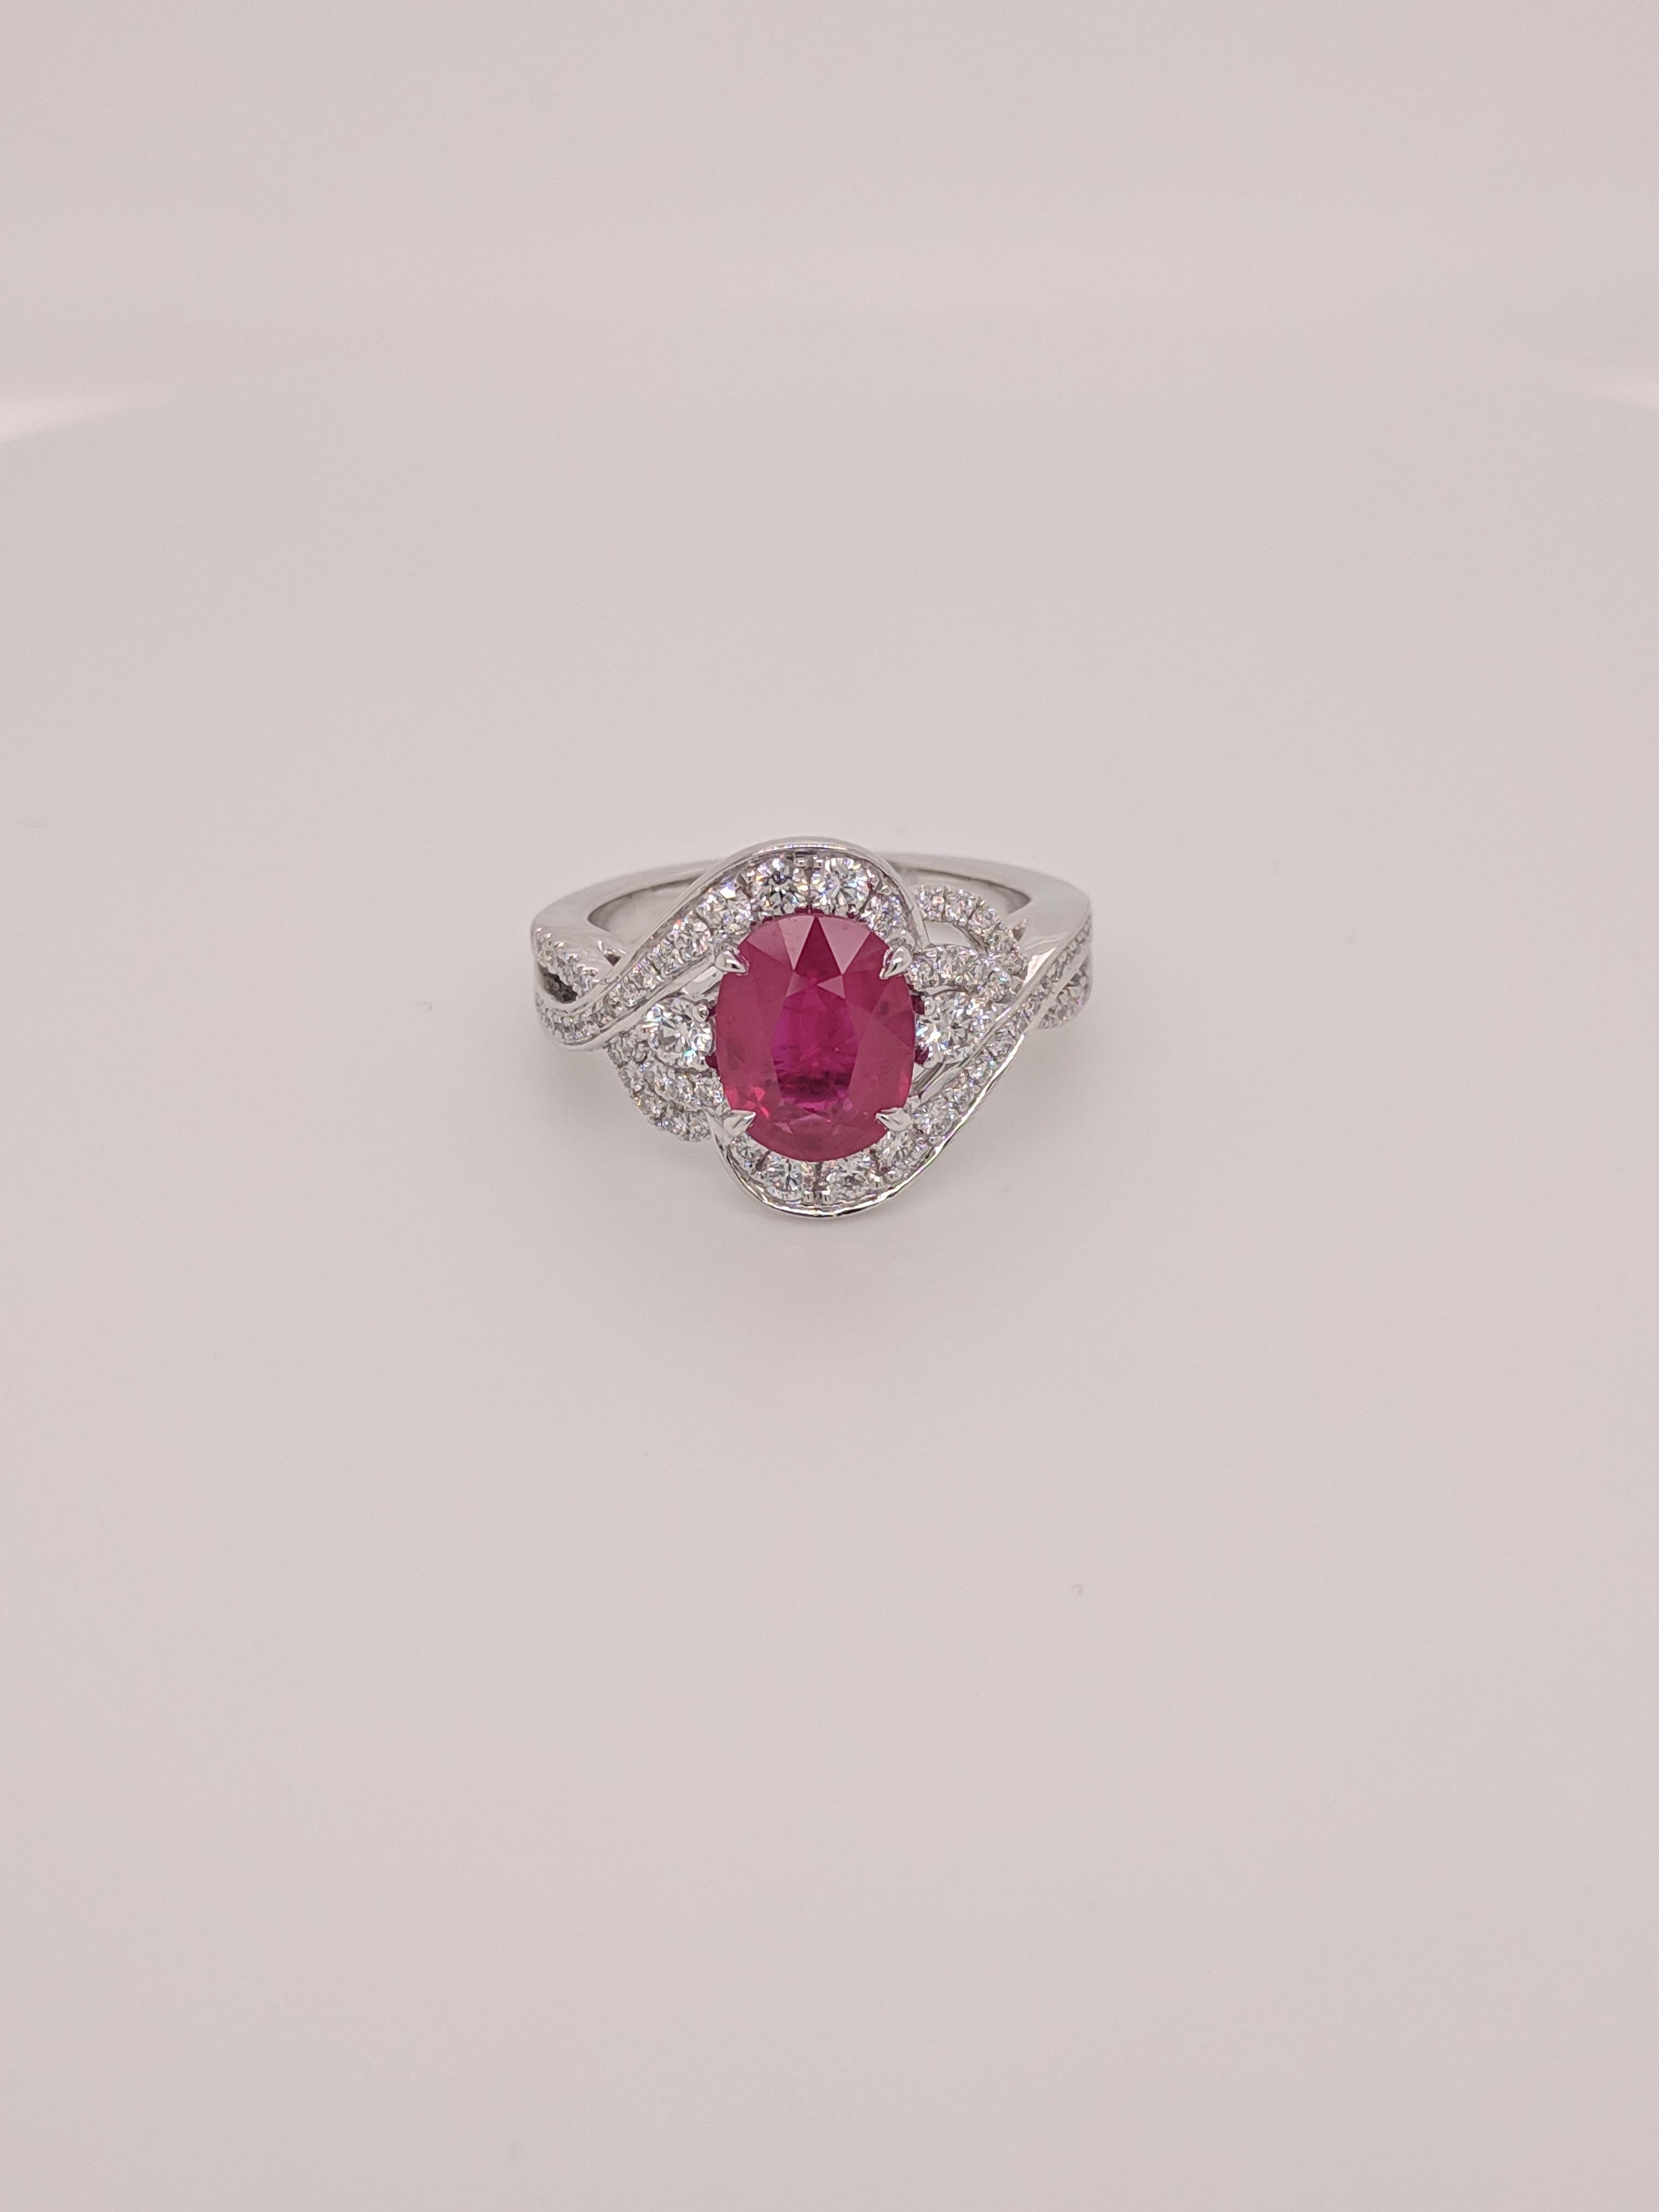 Frederic Sage 2.30 Carat Oval Ruby Diamond Engagement Cocktail Ring For Sale 2